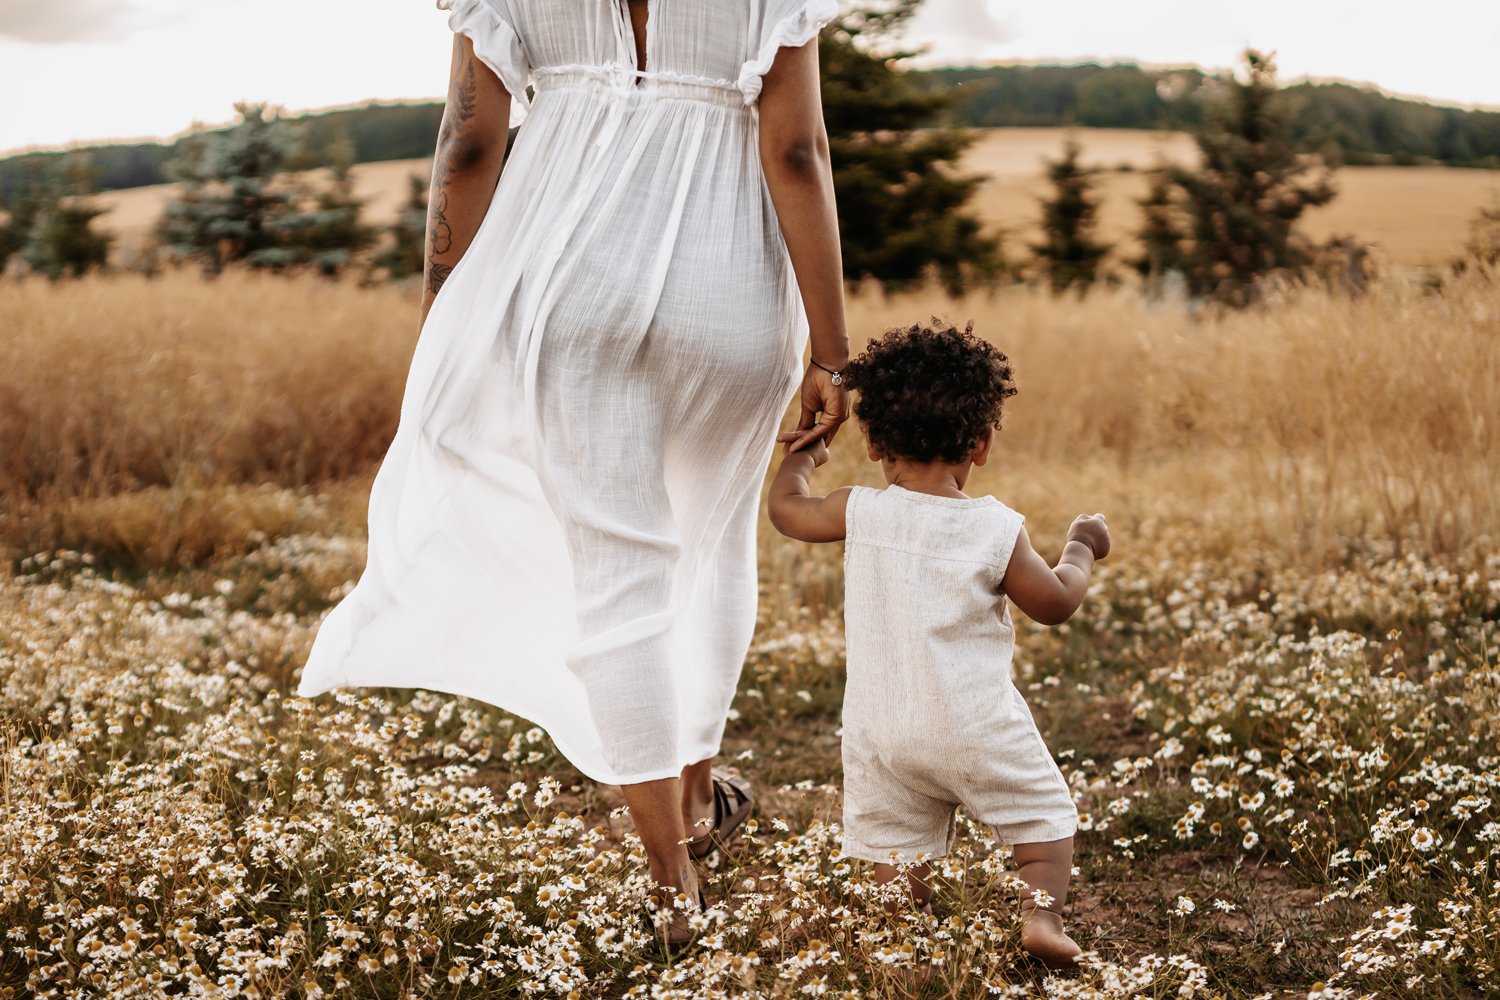 emotive-motherhood-photography-young-mother-with-toddler-barfoot-in-fields-at-sunset-in-ramstein-germany-sarah-havens (16).jpg